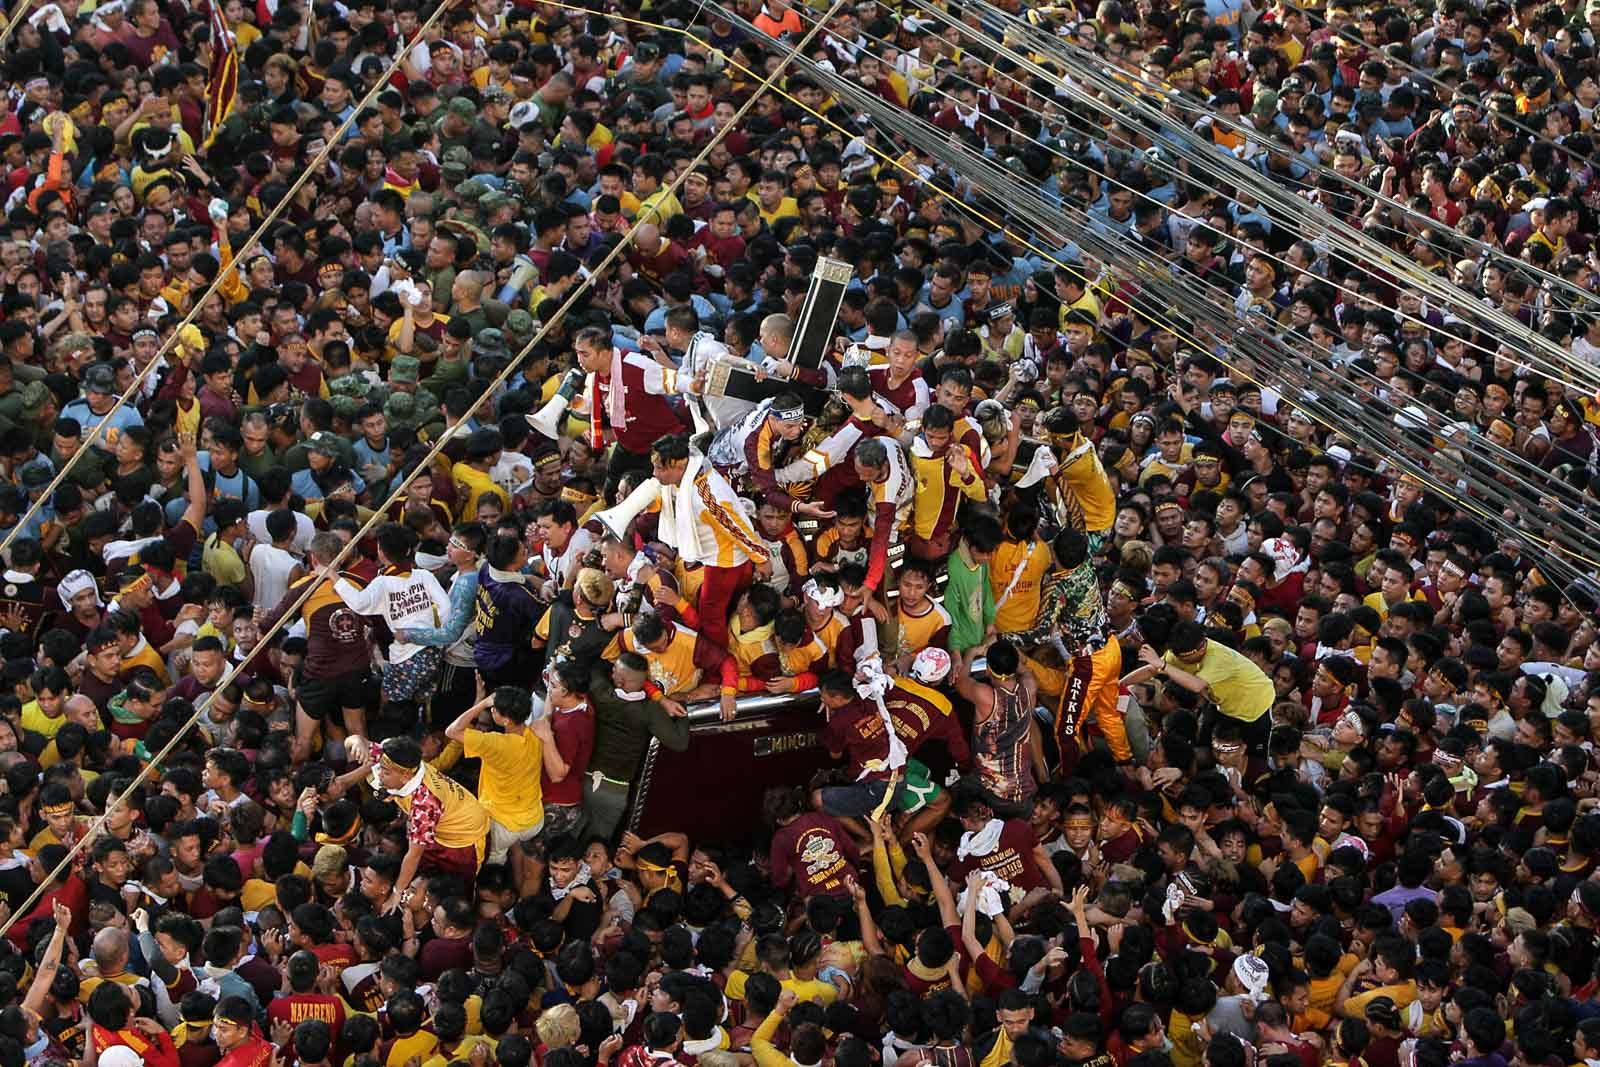 Devotees crowd the andas carrying the image of the Black Nazarene as it passes through the Ayala Bridge in Manila during the Traslacion on January 9, 2020. Photo by Ben Nabong/Rappler 